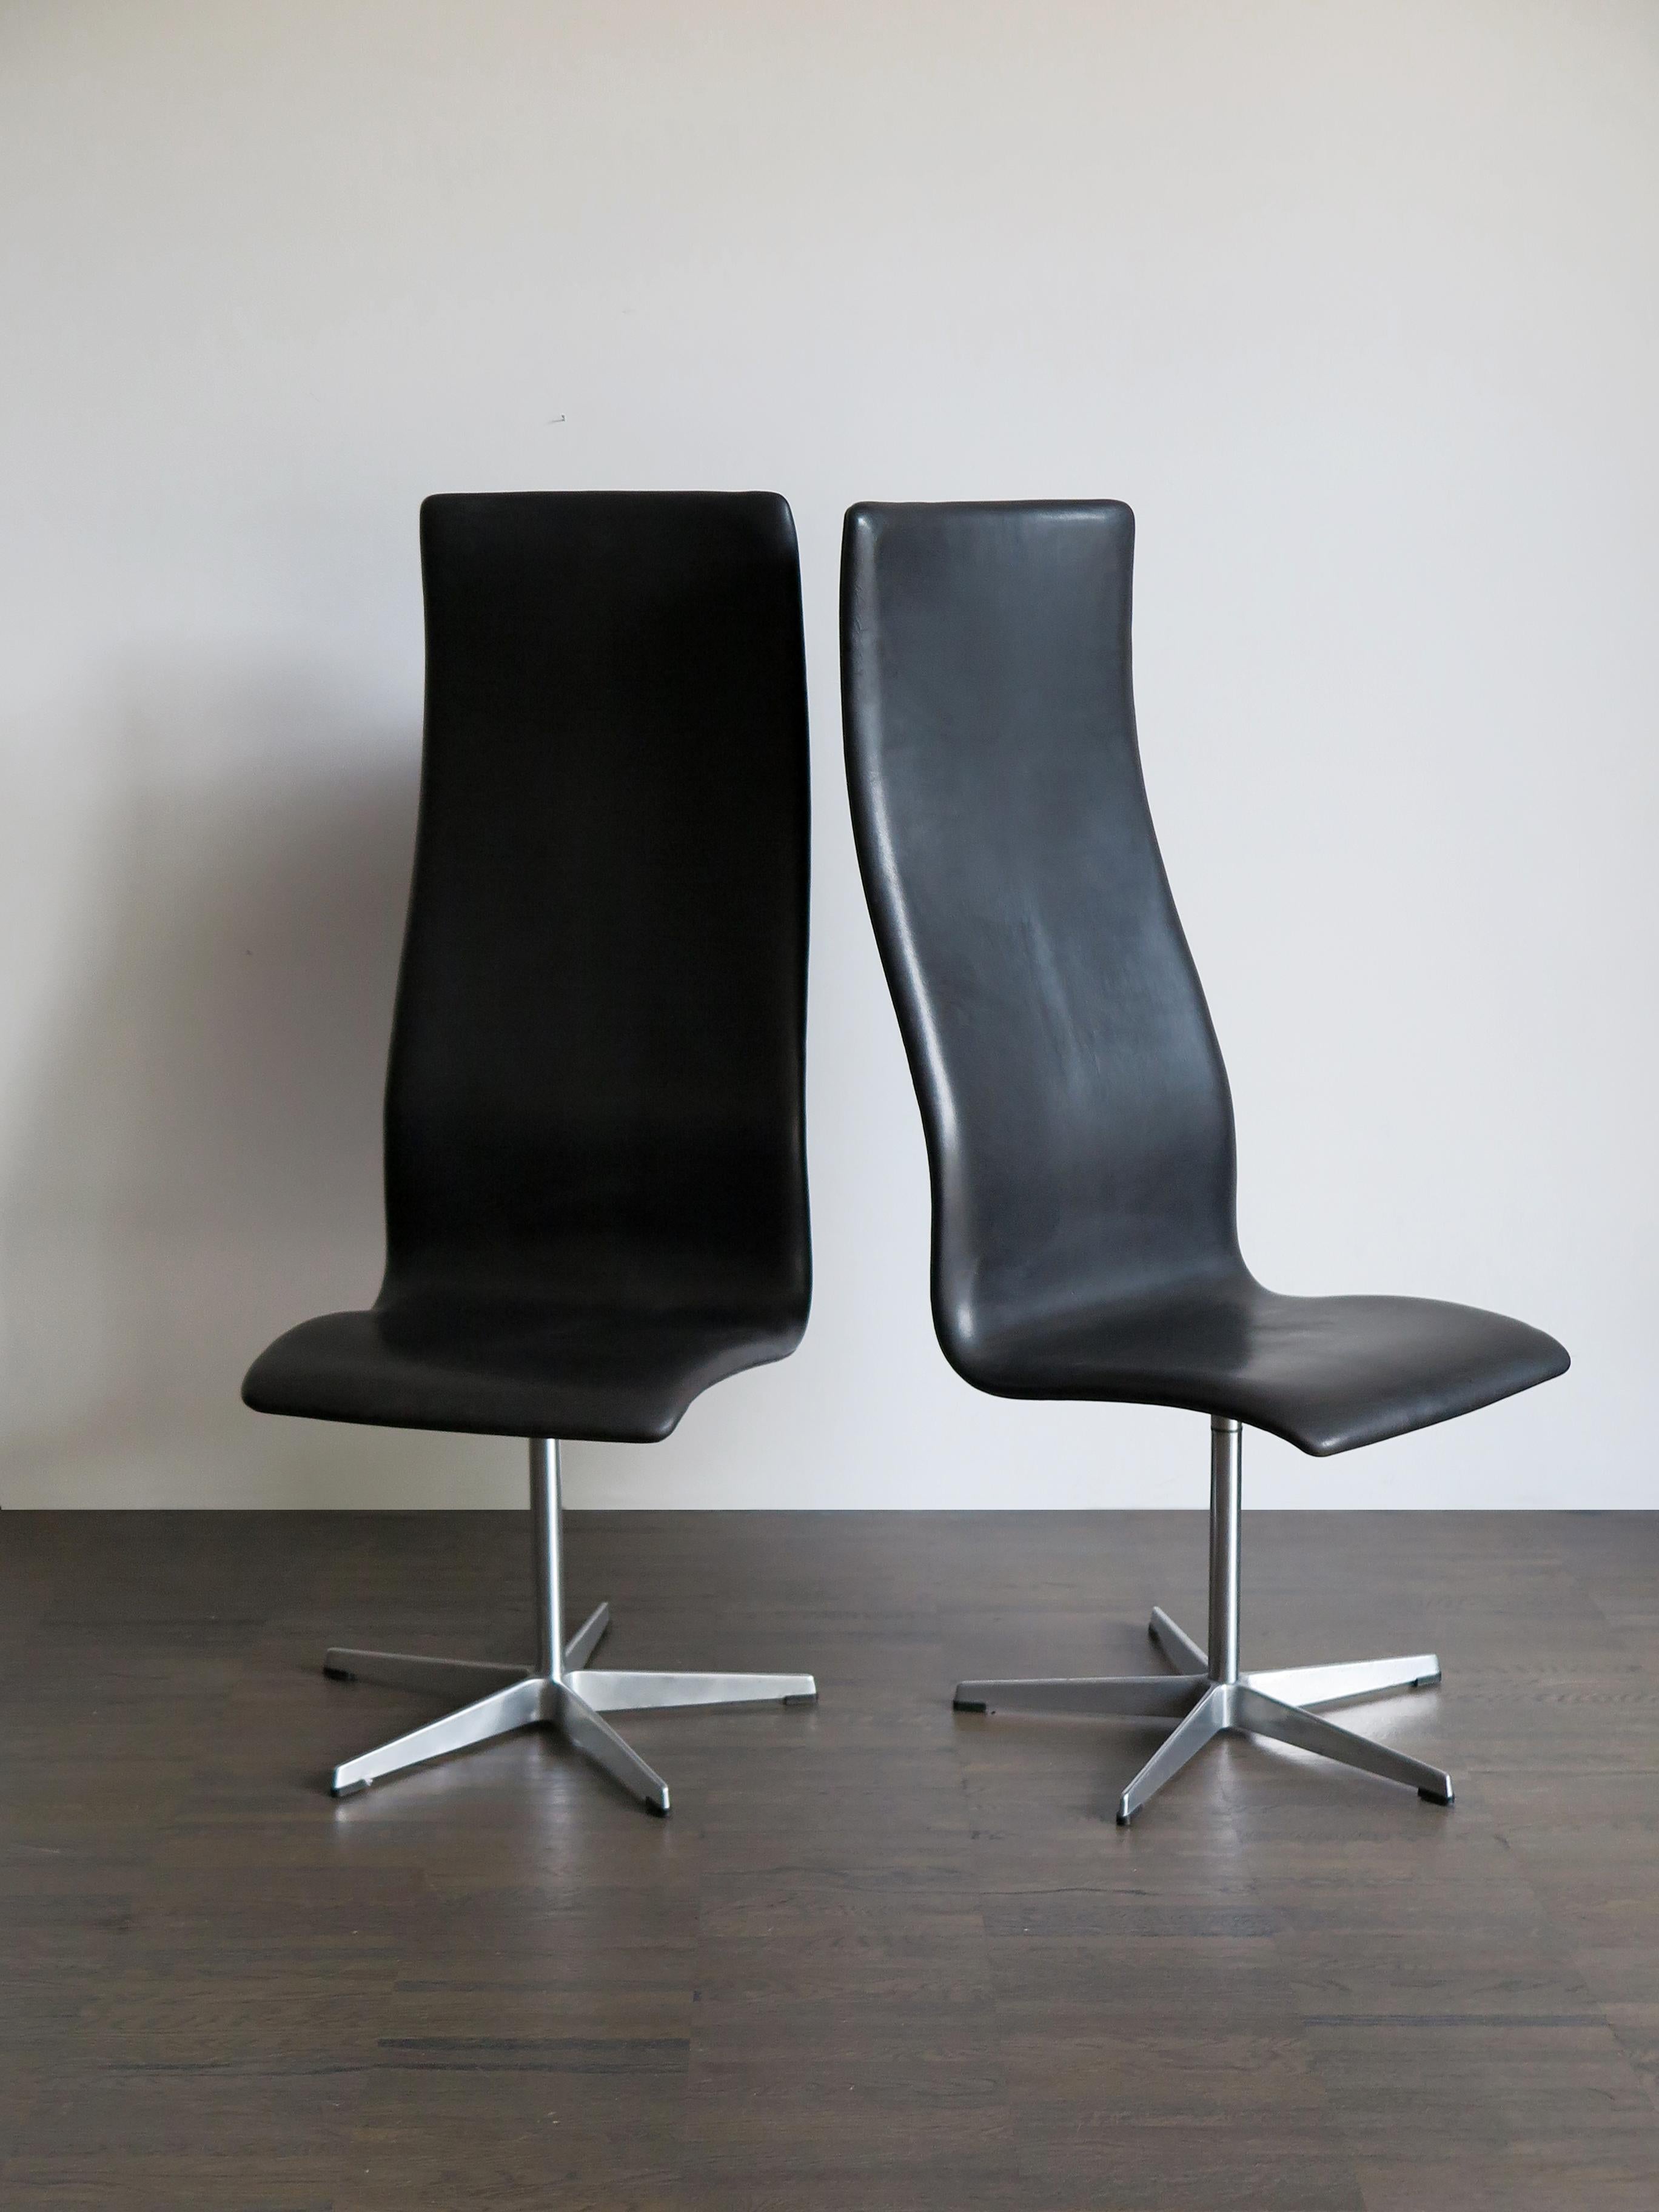 Set of two scandinavian midcentury modern design swivel “Oxford” office chairs designed by Arne Jacobsen and produced by Fritz Hansen with black leather upholstery and metal foot, manufacturer’s adhesive label, 1960s

Please note that the items